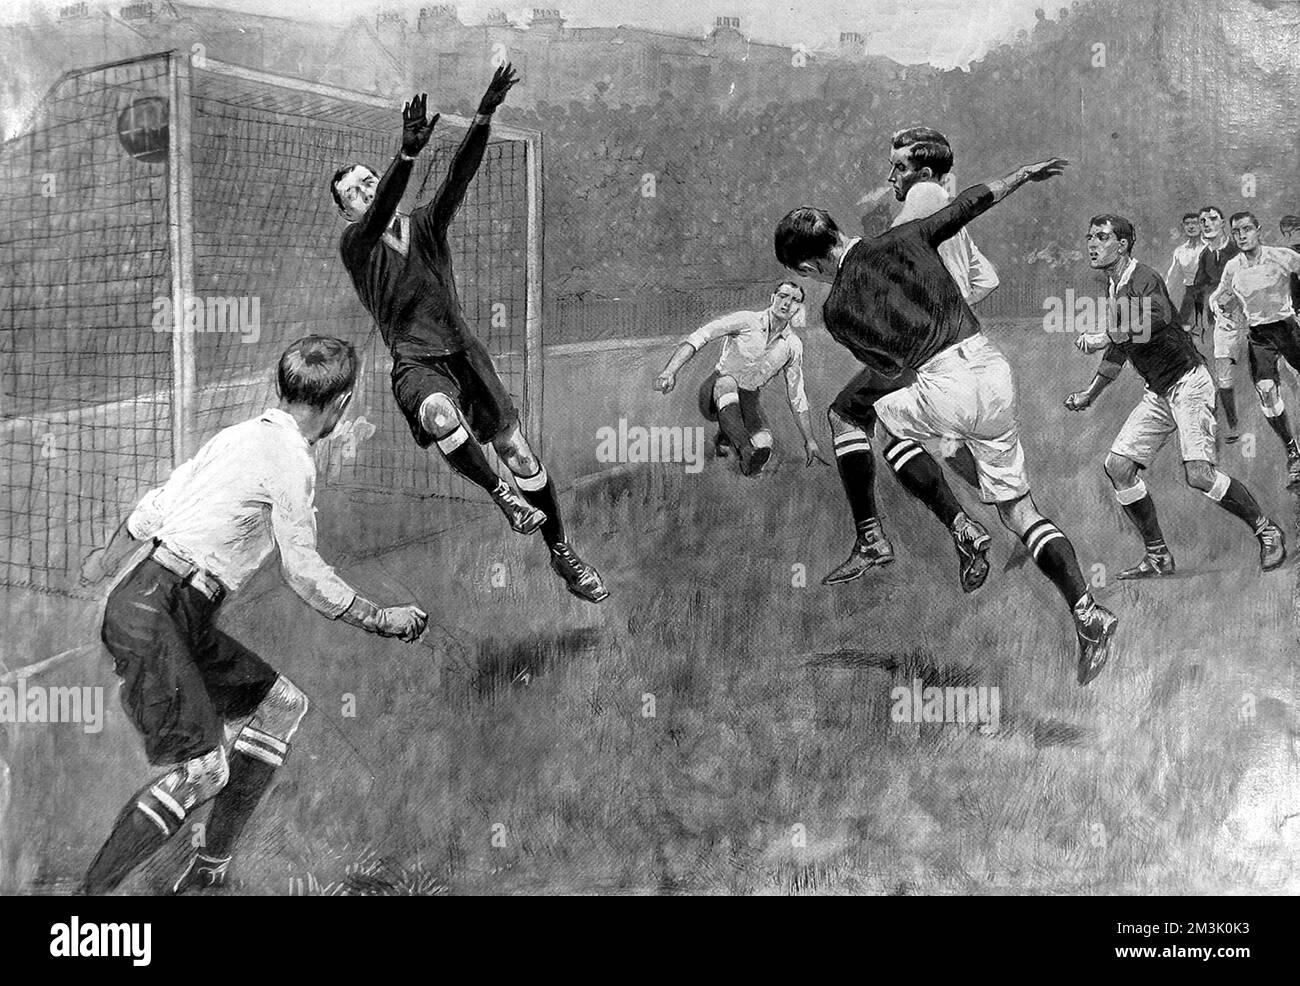 Windridge scoring for Chelsea Football Club, during the First Division, Chelsea vs. Tottenham Hotspur match of December 1909. This was the first time that these clubs played each other in the First Division and the match was won by Chelsea 2-1.     Date: 1909 Stock Photo